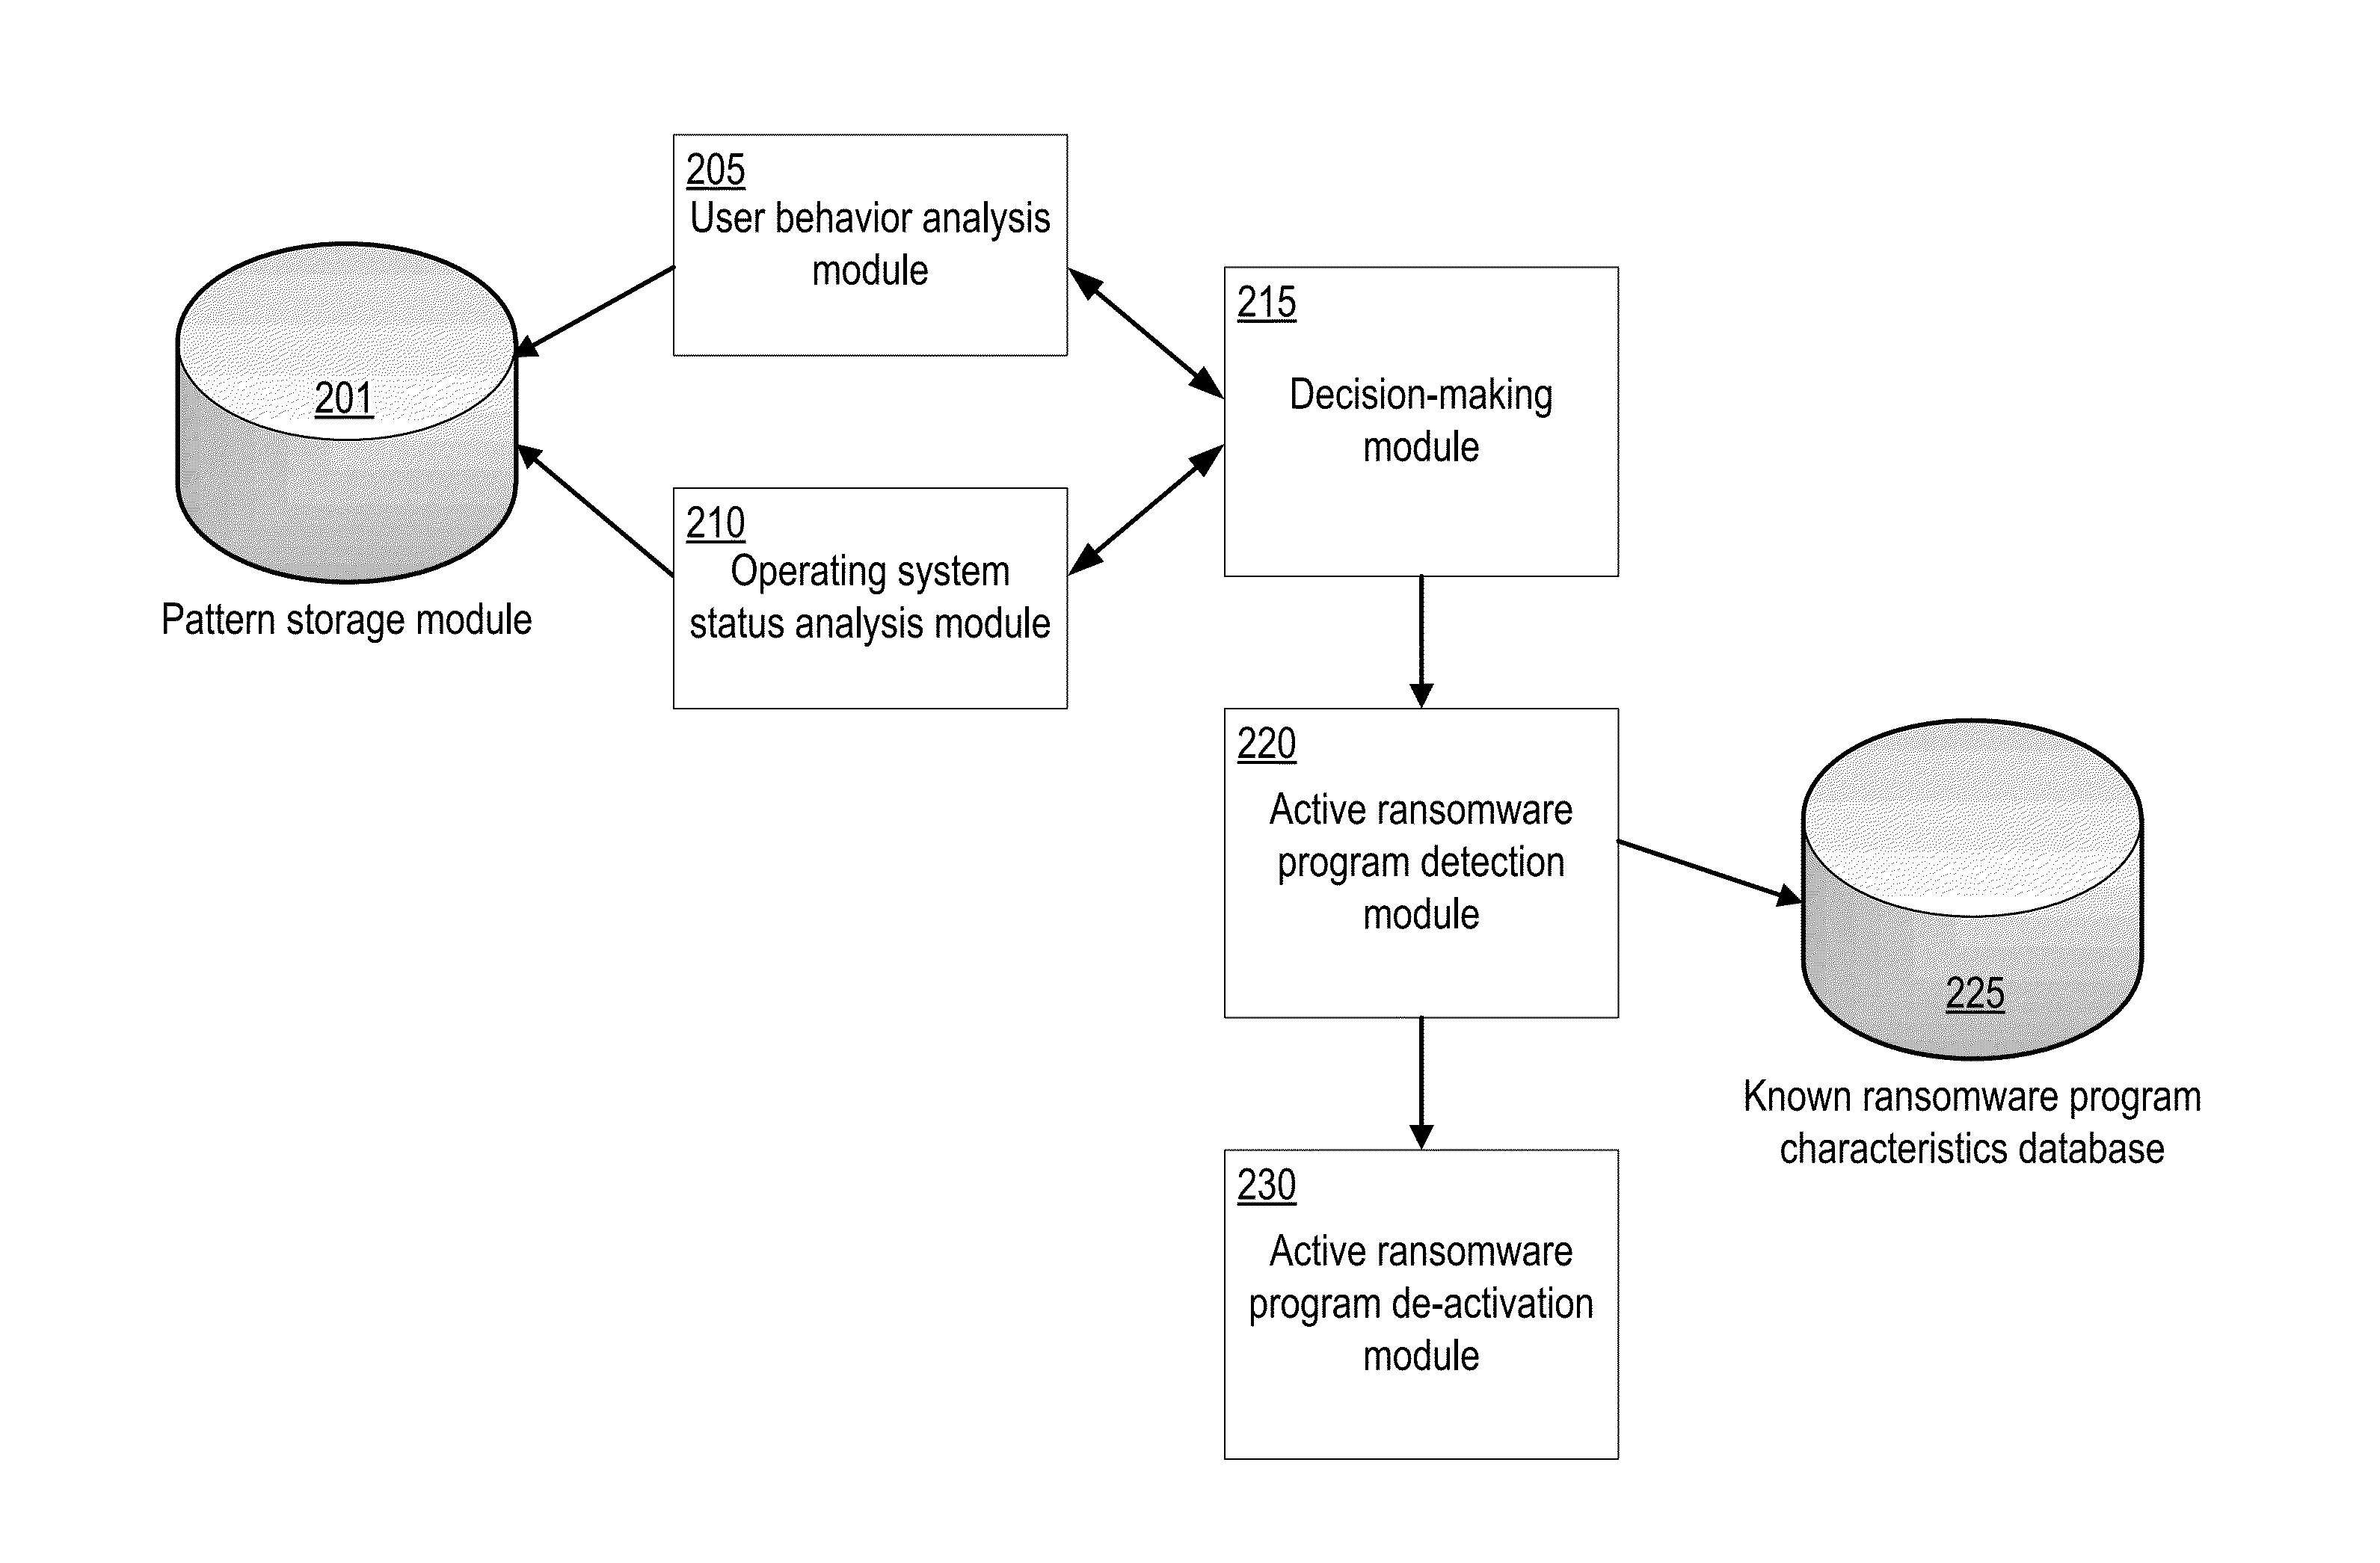 System and method for detecting malware that interferes with the user interface